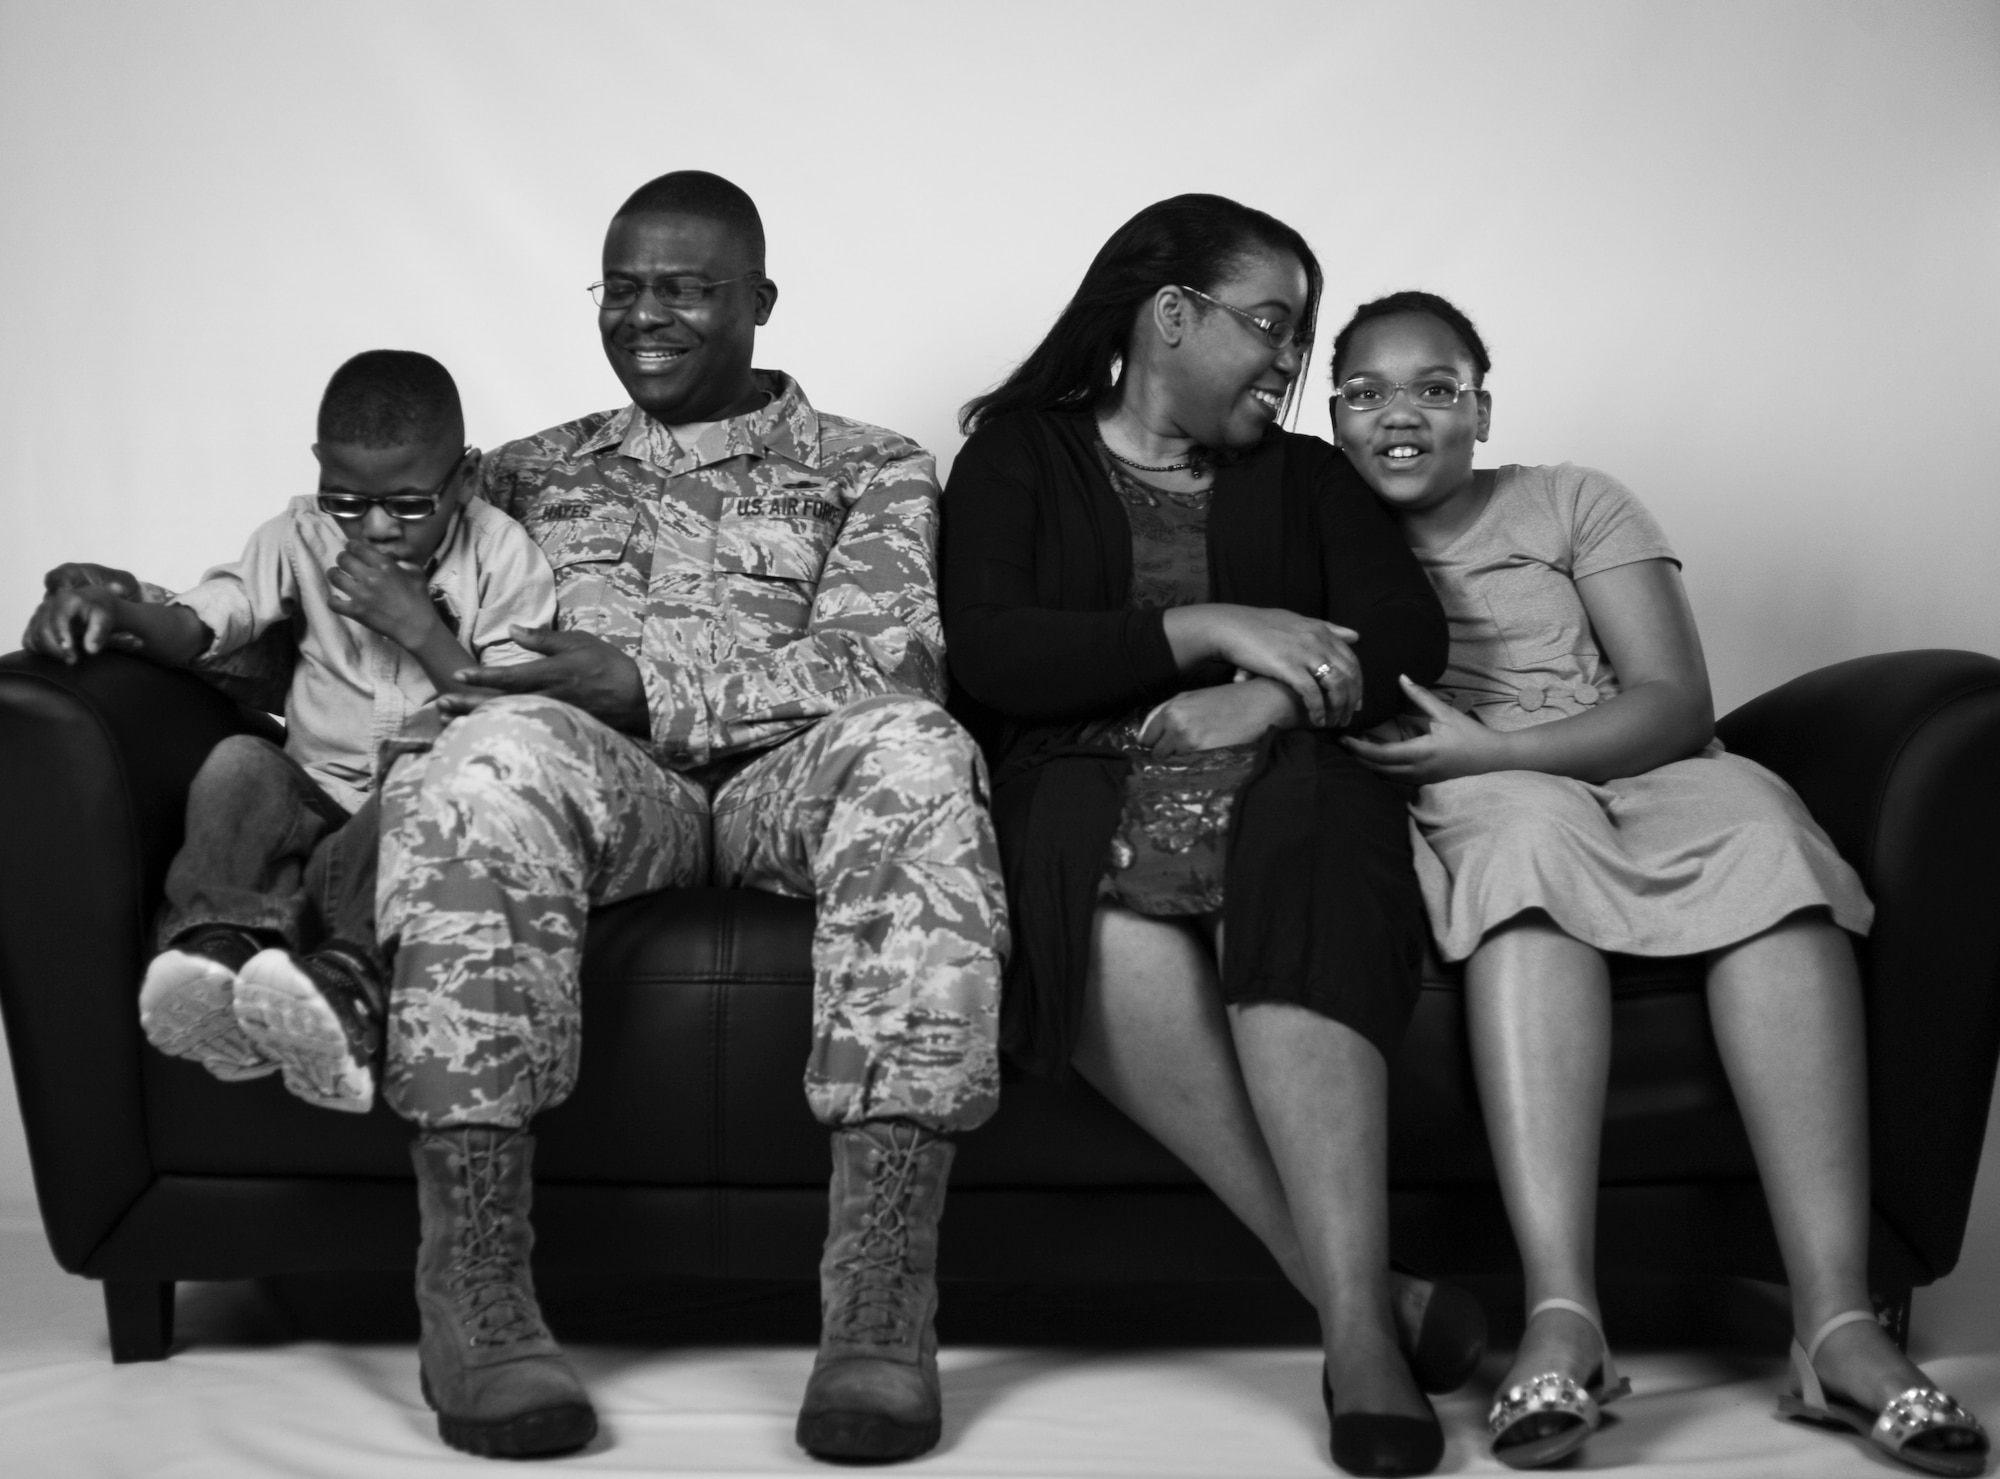 Chief Master Sgt. Henry Hayes, the Air Combat Command’s first sergeant, poses for a photo with his wife, Stephanie, and their adopted children at Joint Base Langley-Eustis, Va., March 27, 2017. Along with adopting two children, the family has also fostered 13 children. (U.S. Air Force photo/Staff Sgt. Natasha Stannard)